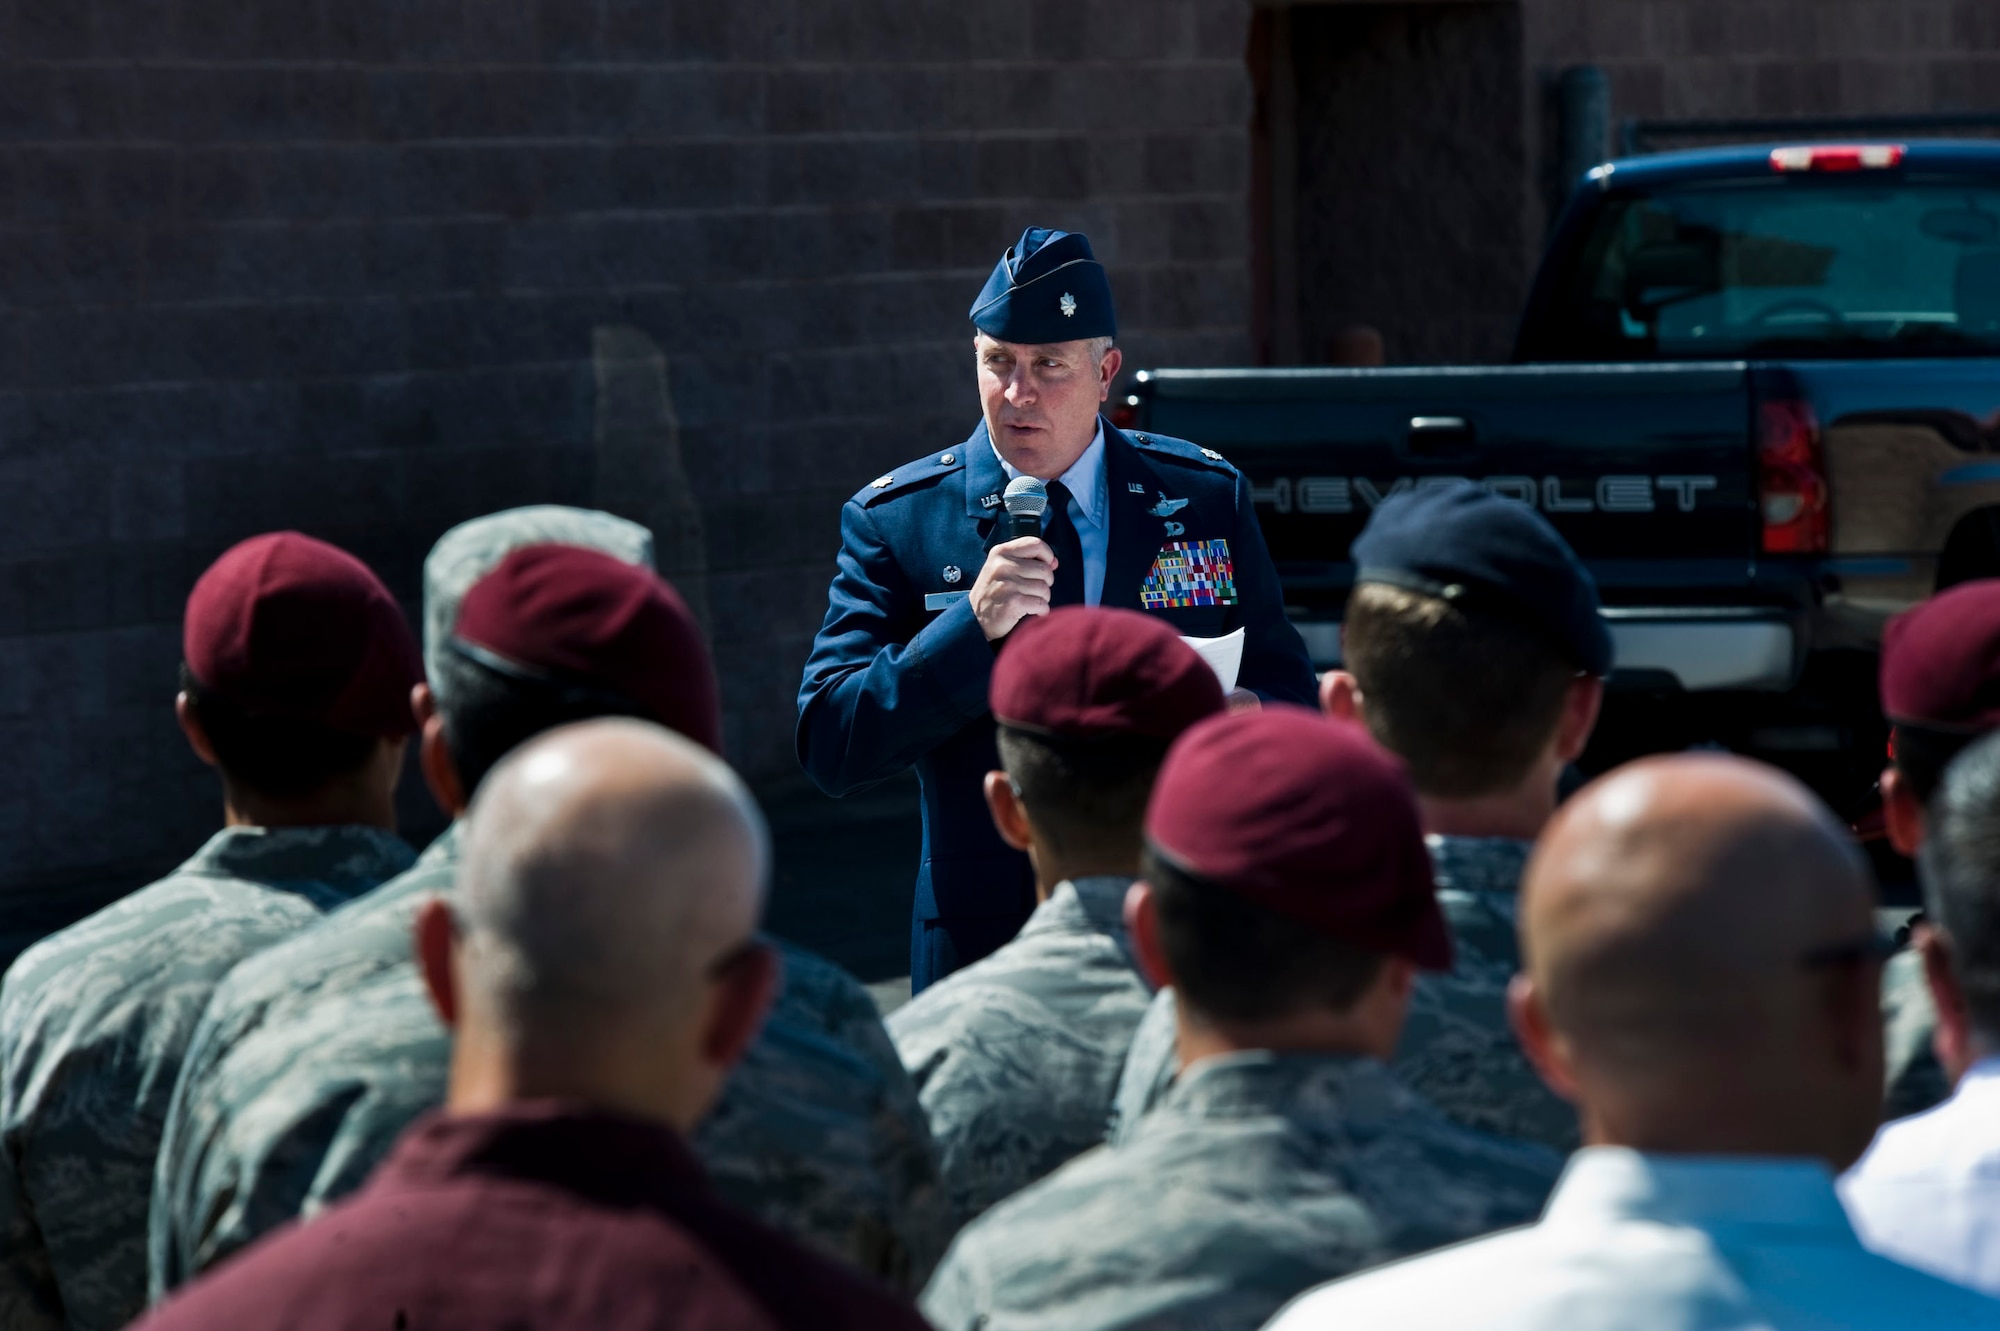 Lt. Col. Daniel Duffy, 66th Rescue Squadron commander, speaks to Airmen during a street renaming ceremony June 10, 2013, at Nellis Air Force Base, Nev.  The PEDRO 66 crew's HH-60G Pavehawk helicopter was shot down and crashed in southwest Afghanistan June 9, 2010, killing five of the crew and critically injuring two. (U.S. Air Force Photo by Airman 1st Class Jason Couillard)